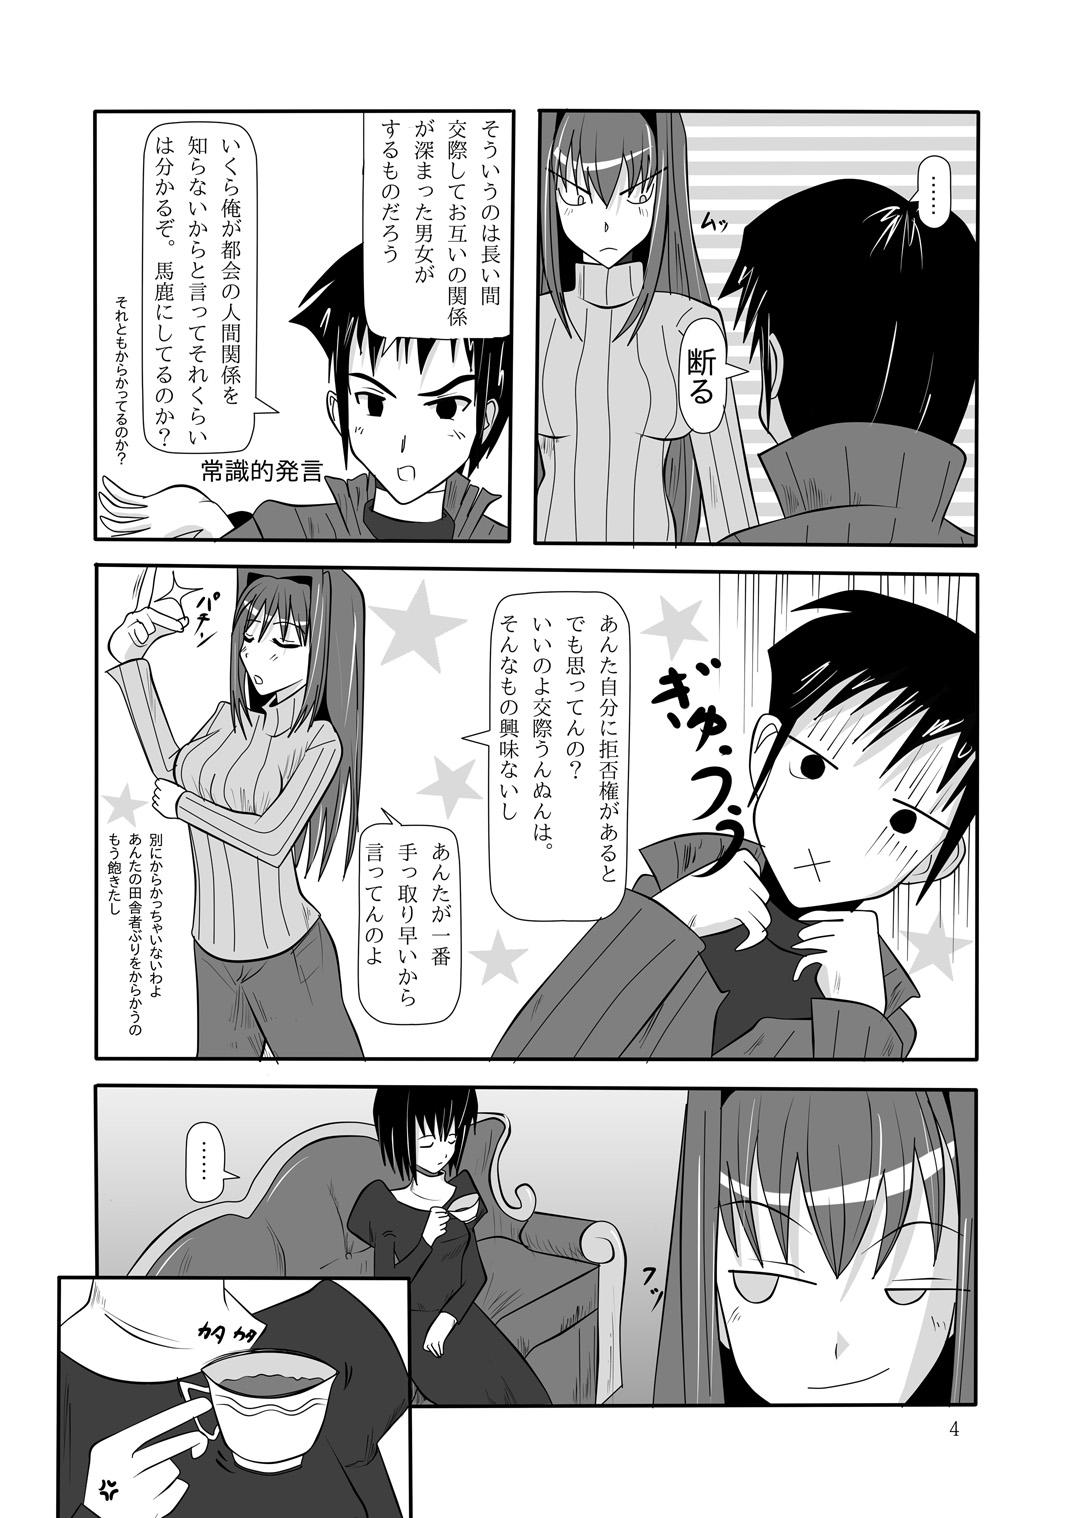 Roughsex smells like teen spirit - Mahou tsukai no yoru | witch on the holy night Sixtynine - Page 5